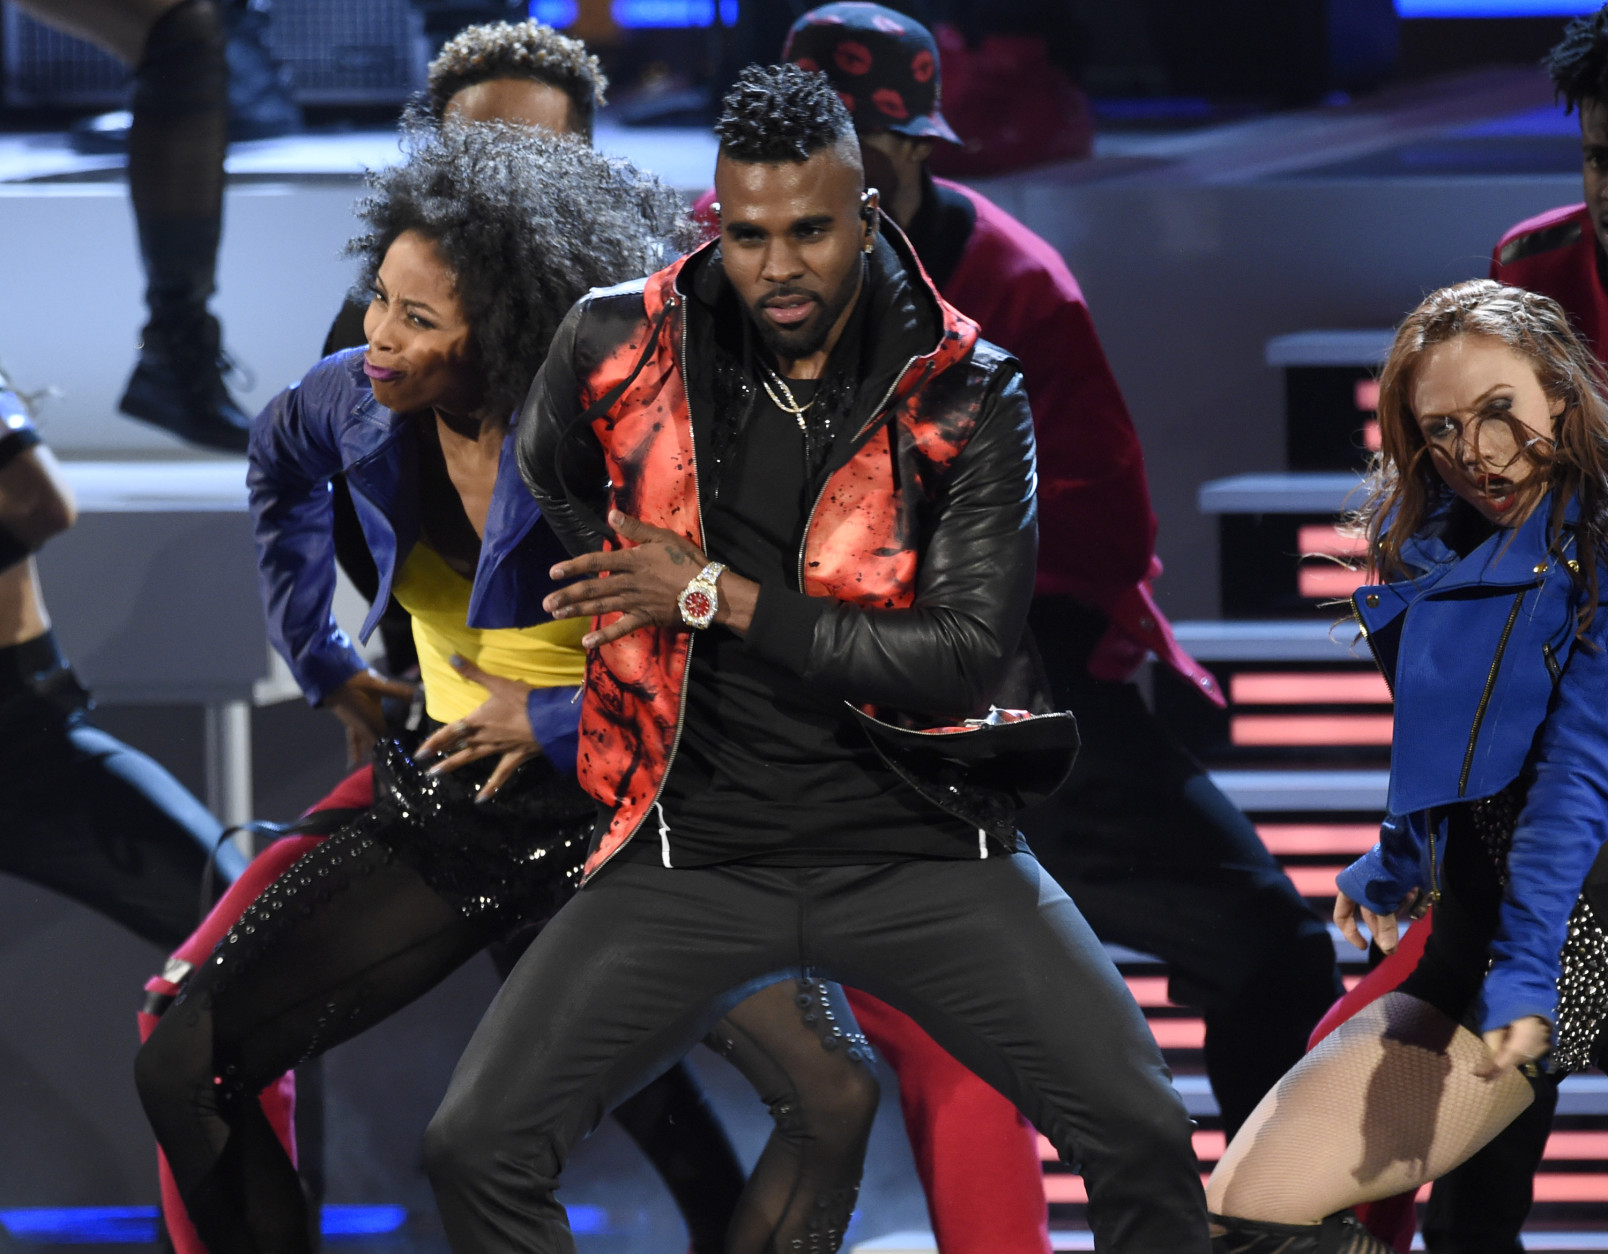 Jason DeRulo performs at the People's Choice Awards at the Microsoft Theater on Wednesday, Jan. 6, 2016, in Los Angeles. (Photo by Chris Pizzello/Invision/AP)